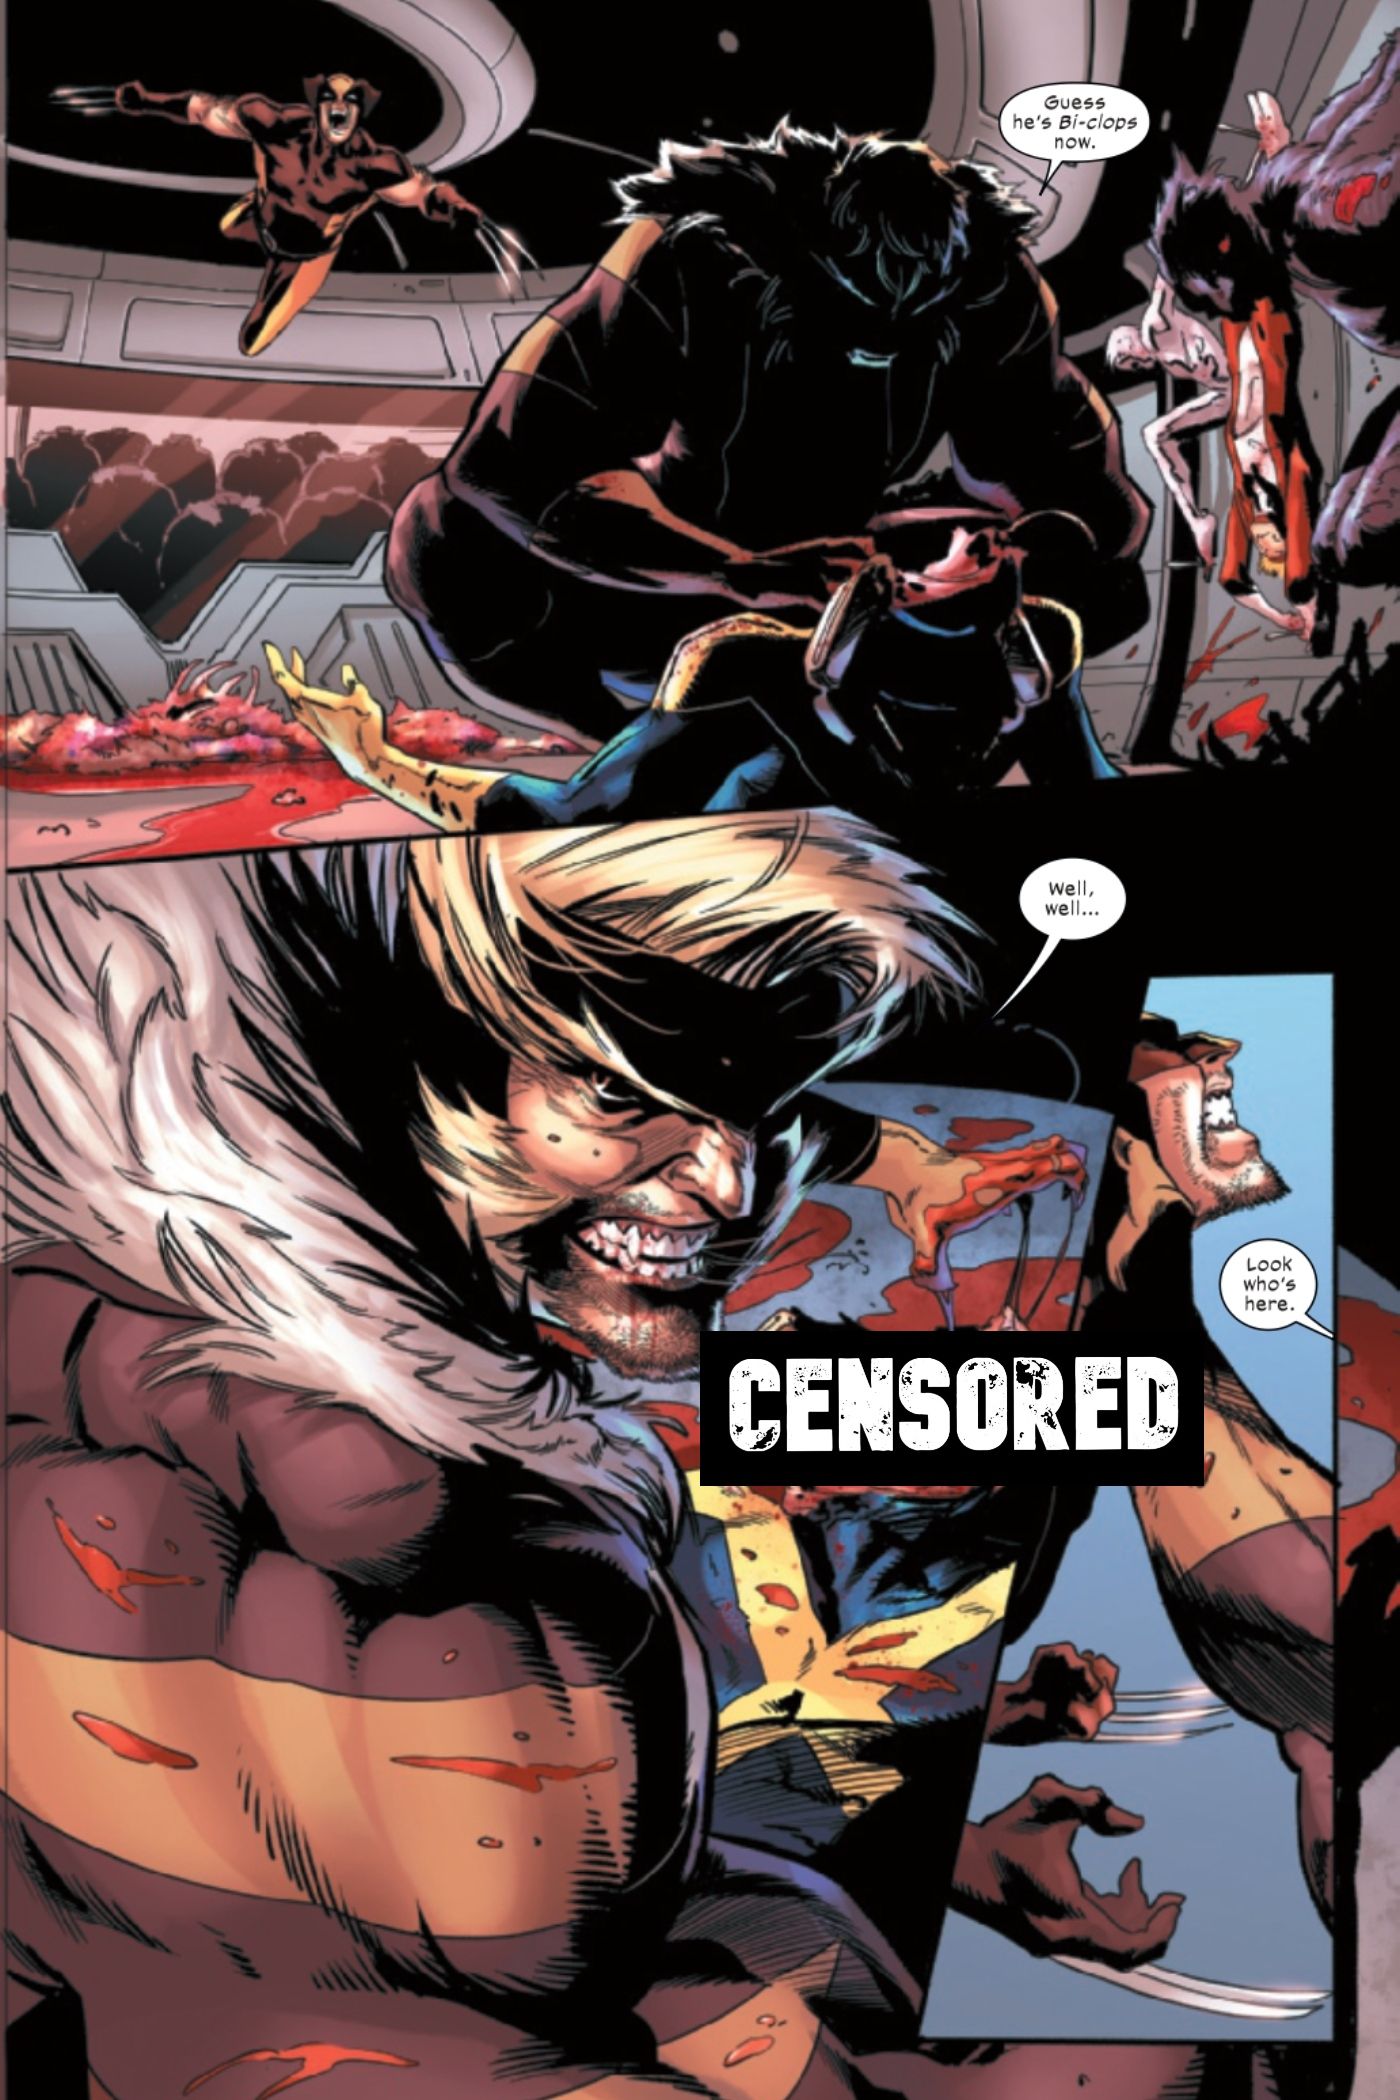 Wolverine #41 - The Sabretooth War Preview page 3.